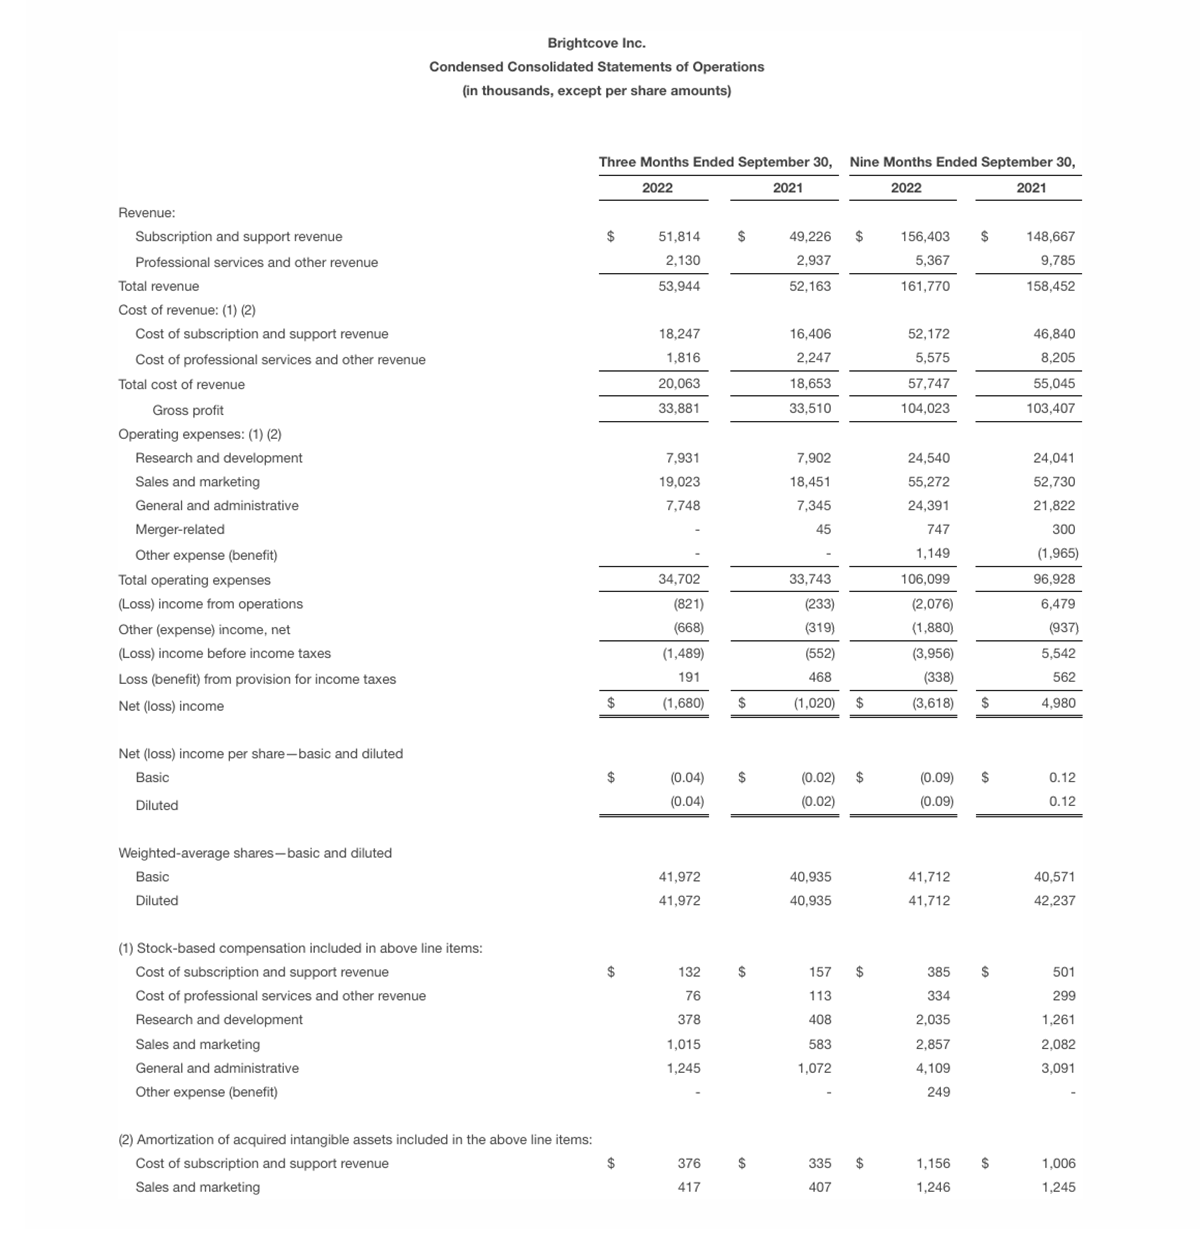 bc-q3-2022-table-2-condensed-consolidated-statements-operations